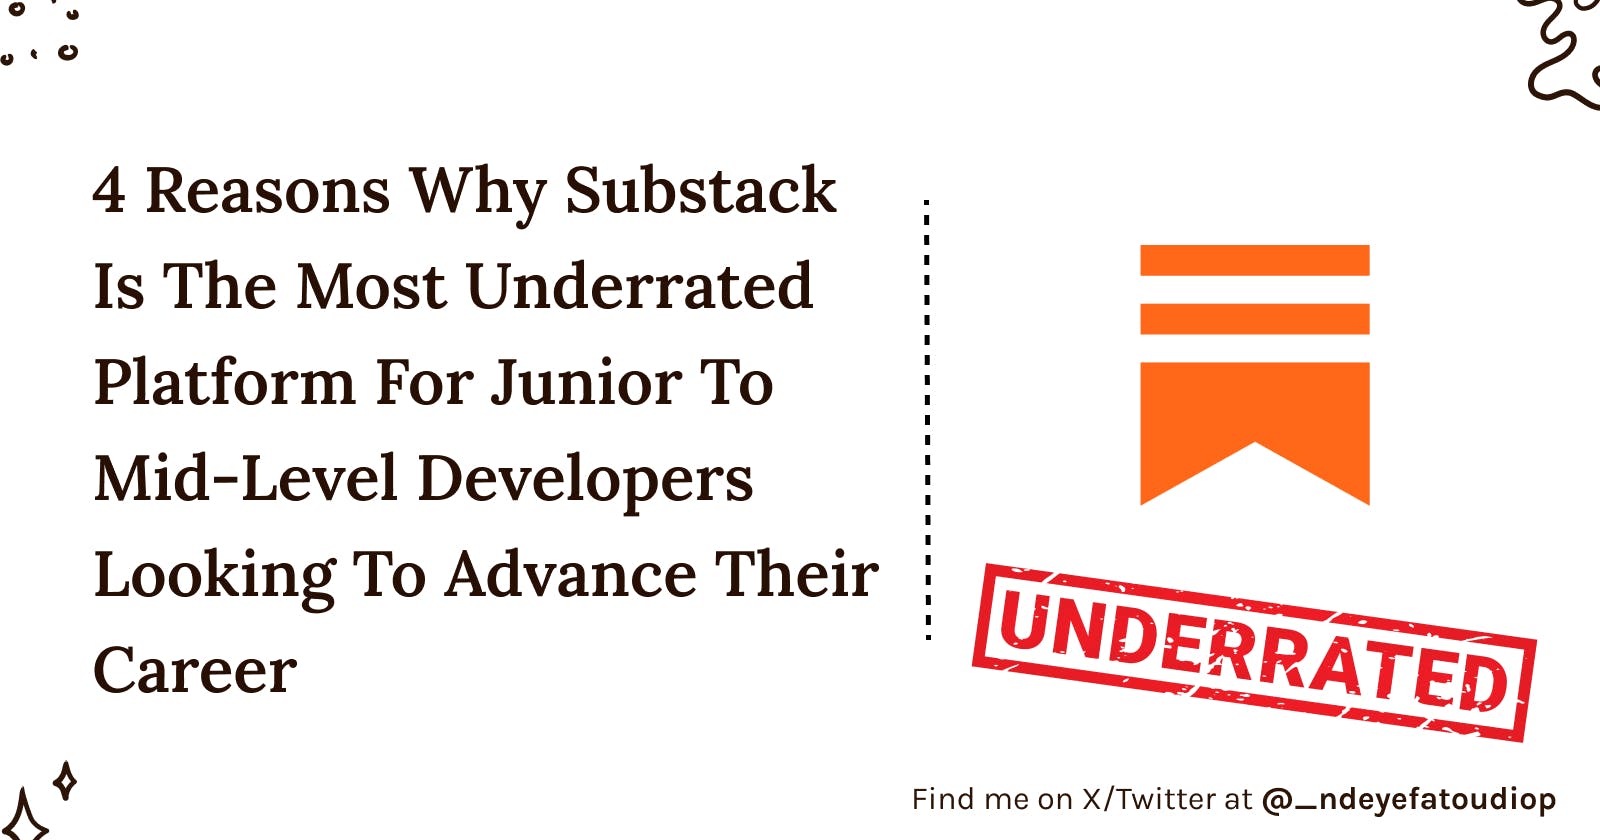 4 Reasons Why Substack Is The Most Underrated Platform For Junior To Mid-Level Developers Looking To Advance Their Career